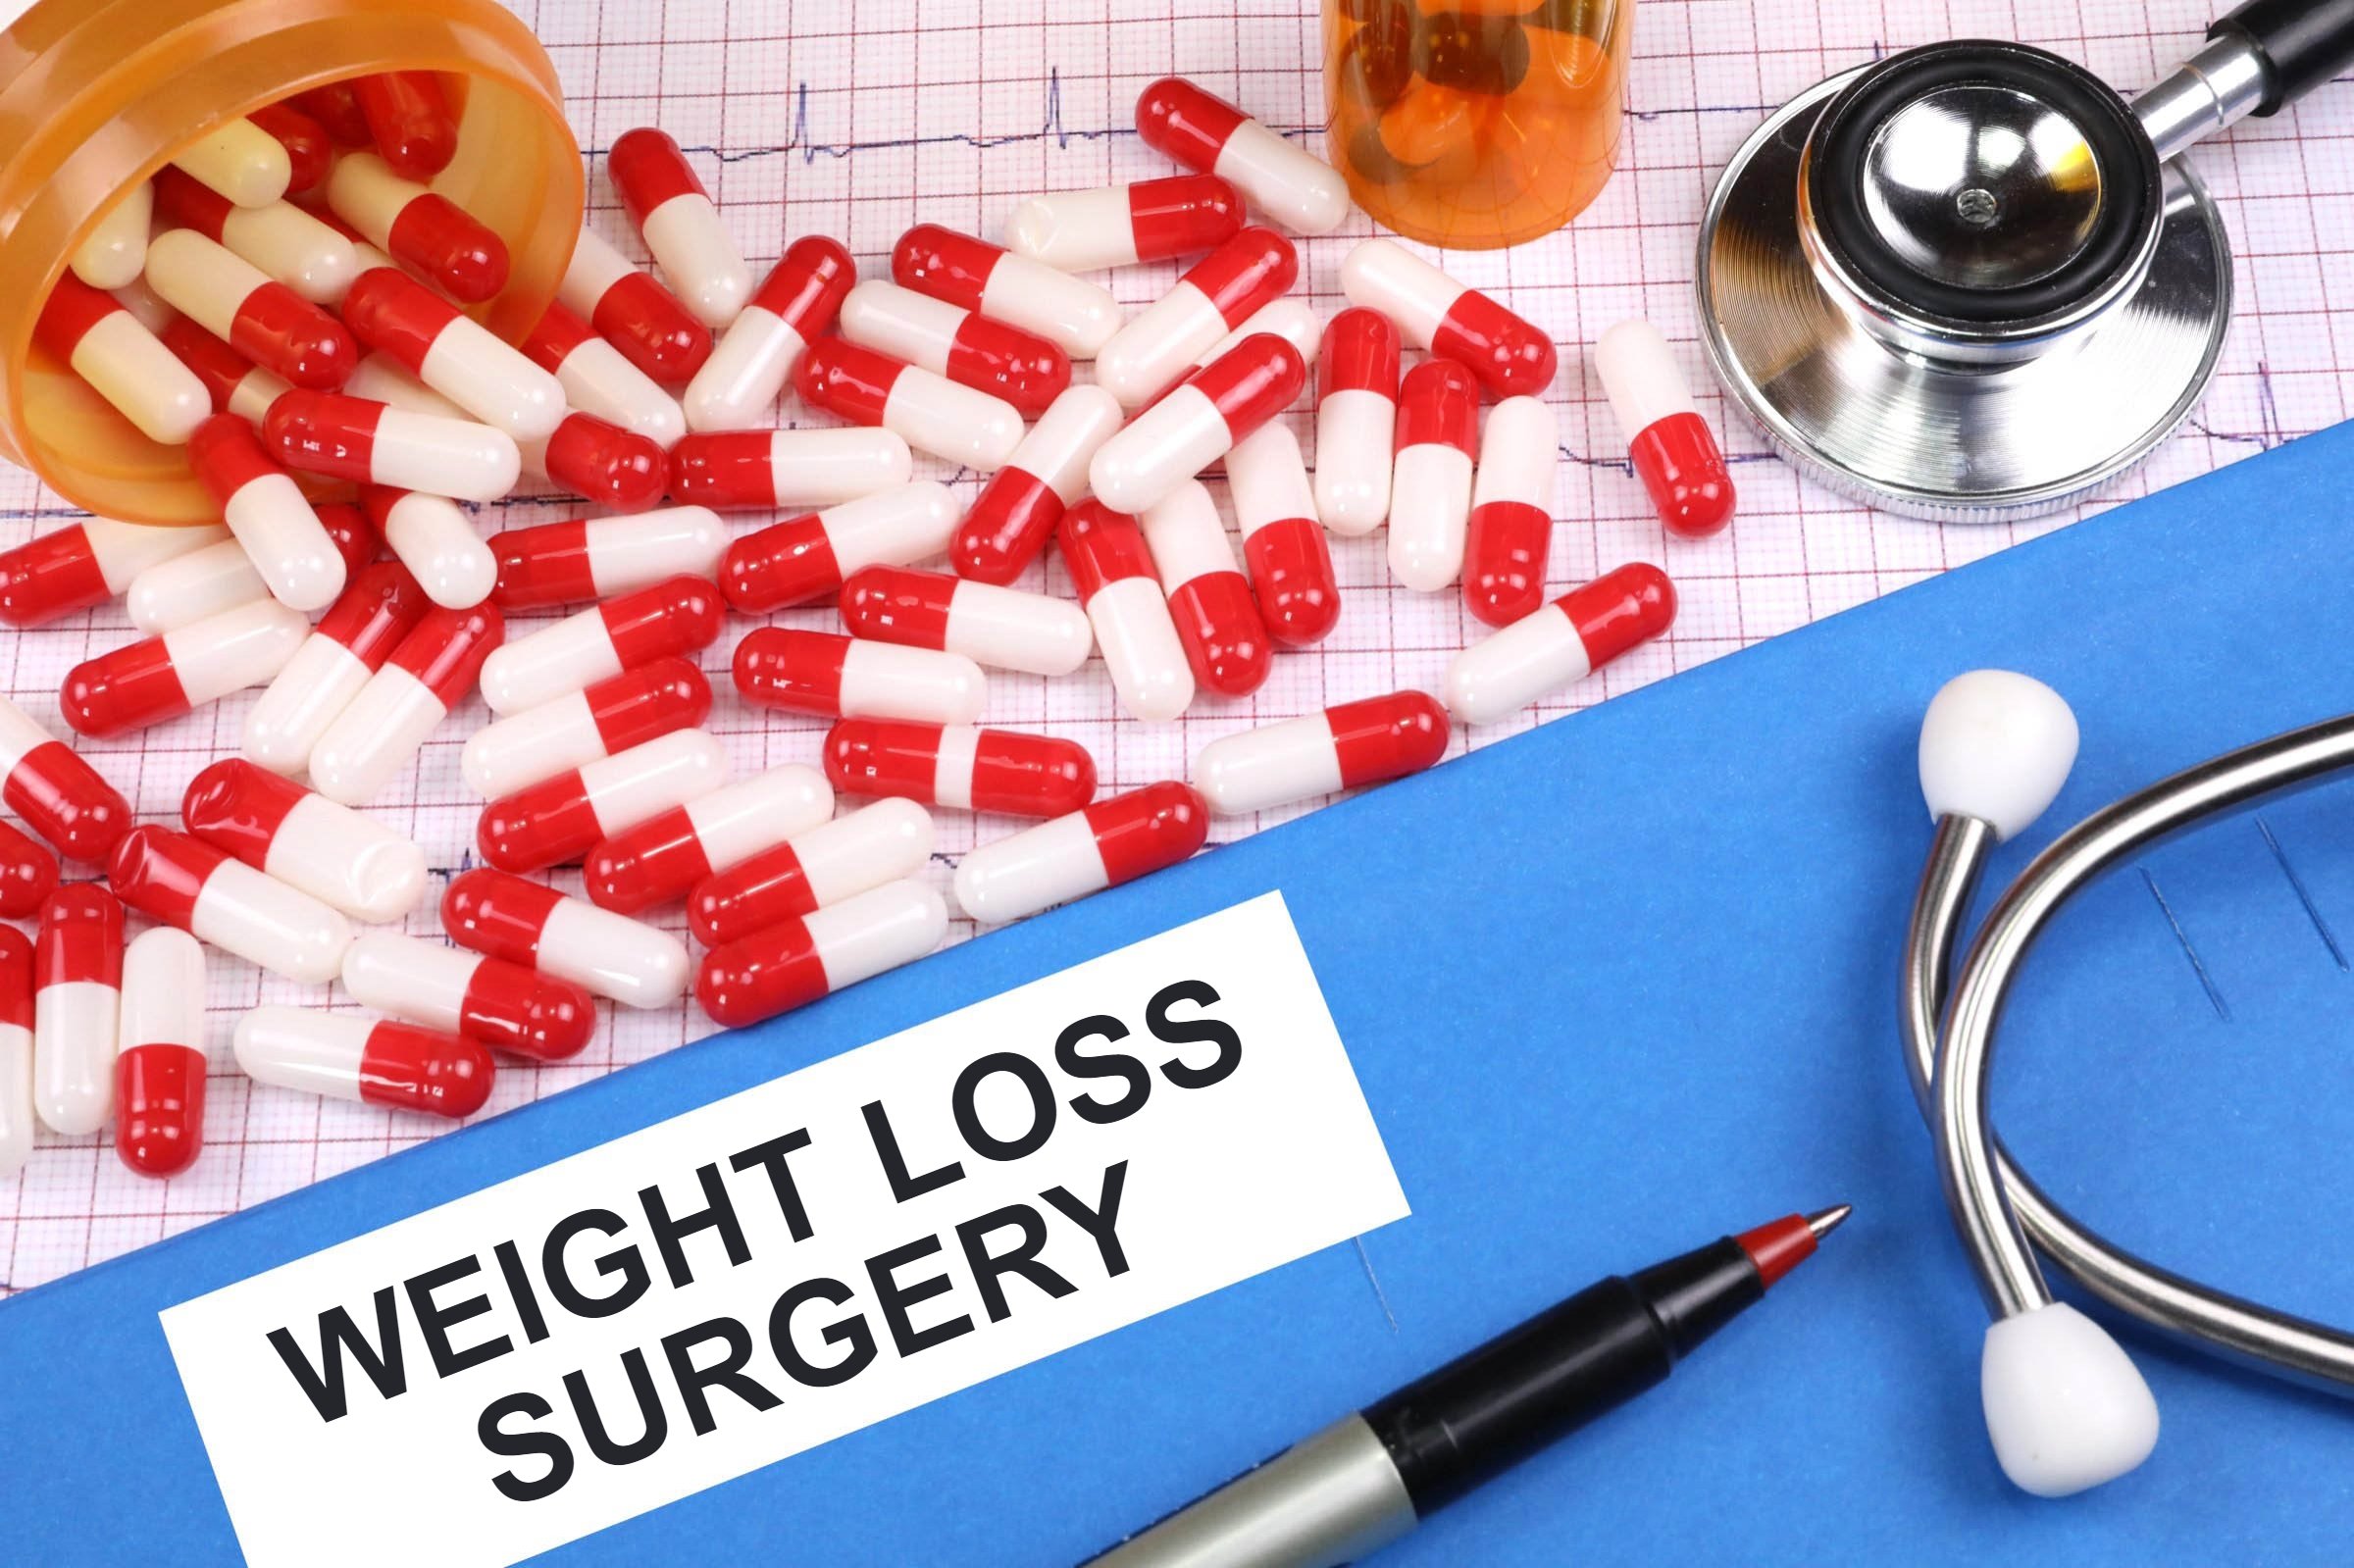 WEIGHT LOSS SURGERY, BARIATRIC SURGERY, Sleeve Gastrectomy, and Gastric Bypass